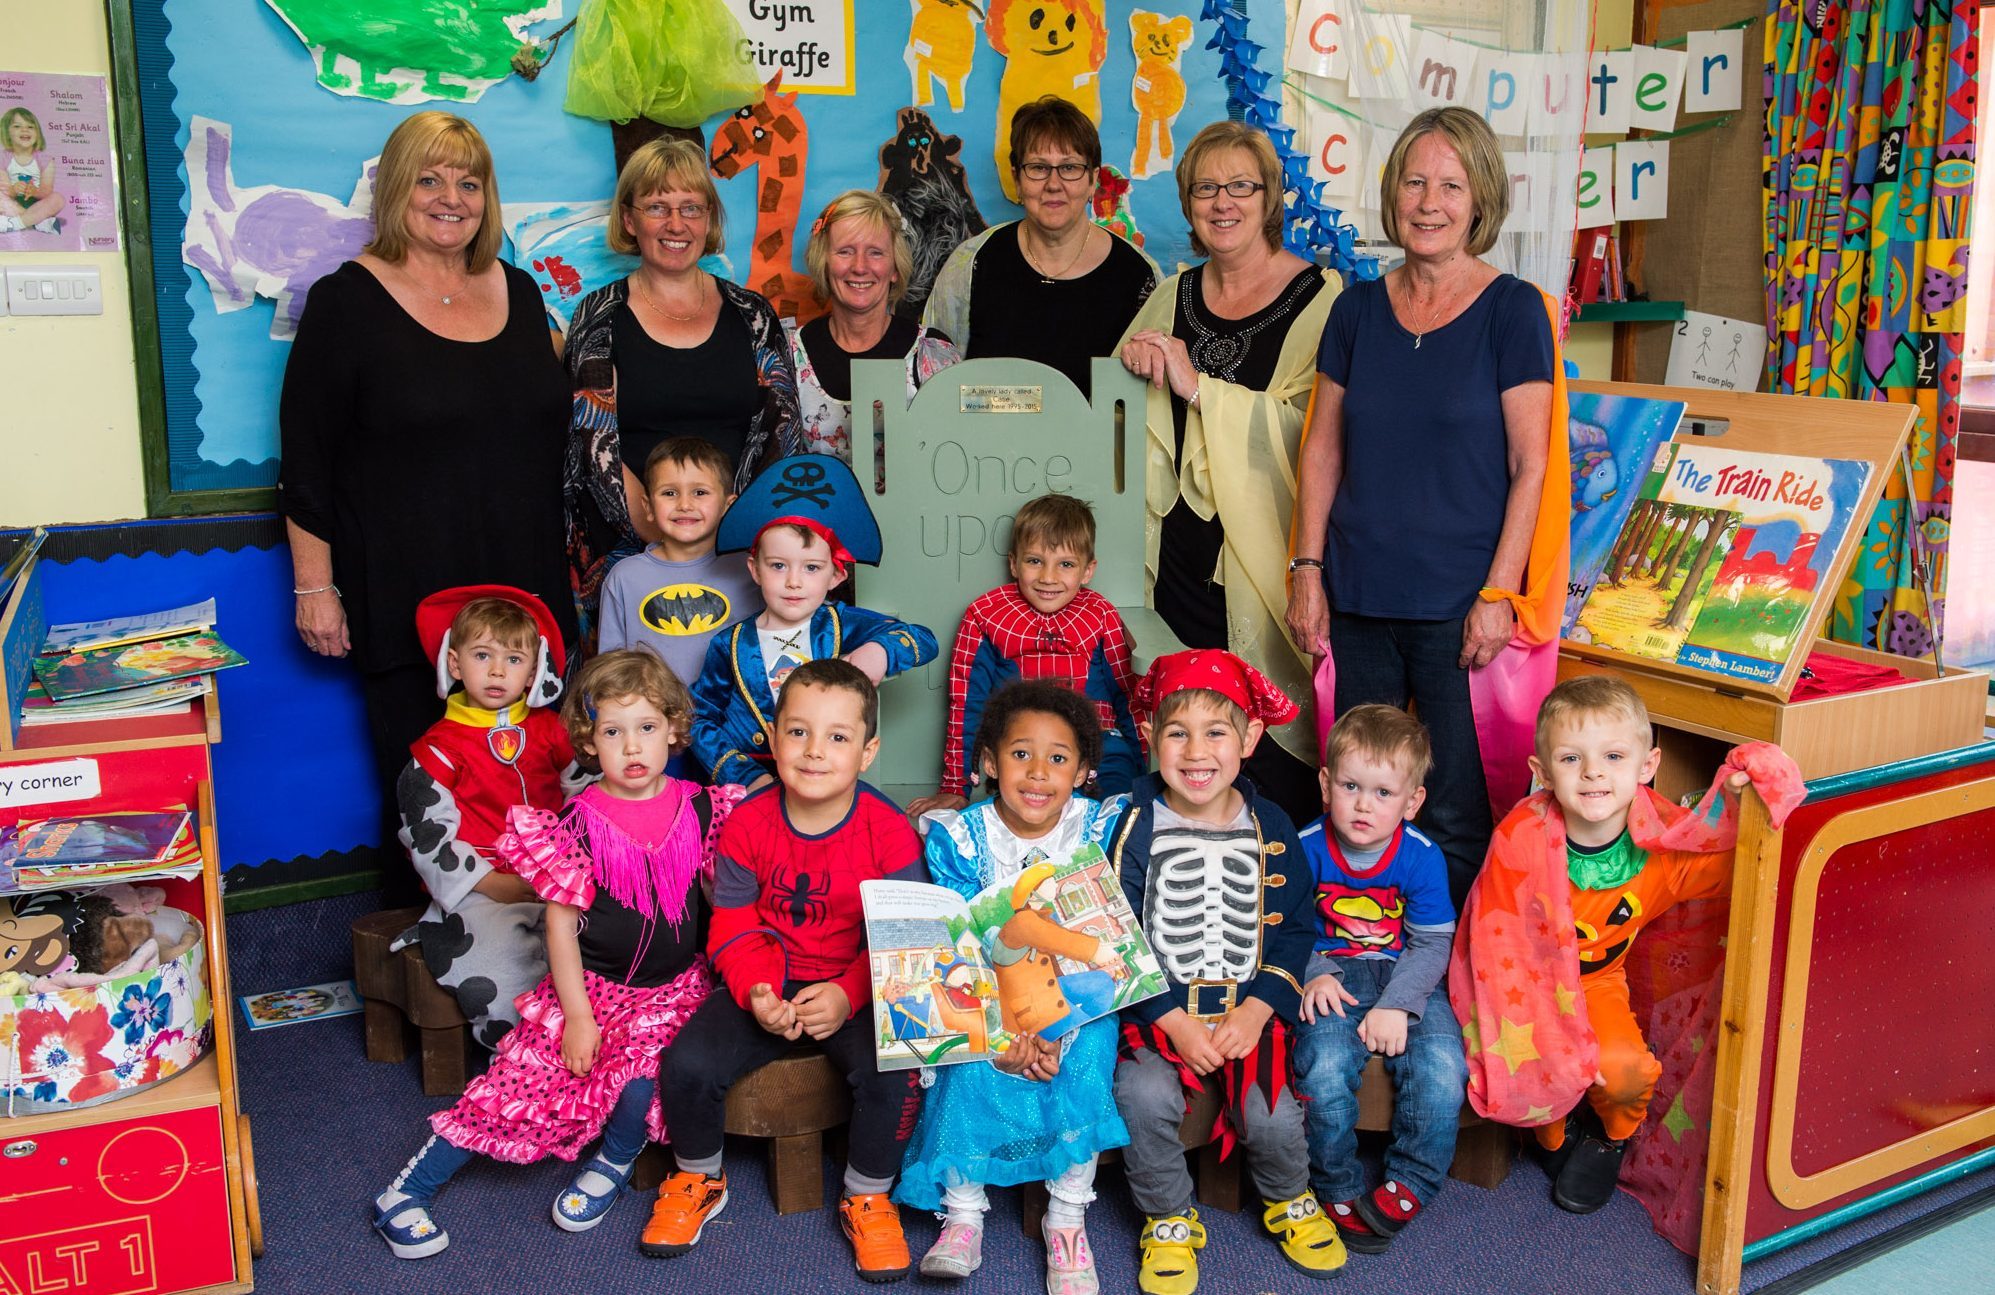 Perth's Muirton Community Nursery held a Once Upon a Time Day in memory of Cate McKechnie who passed away last year.